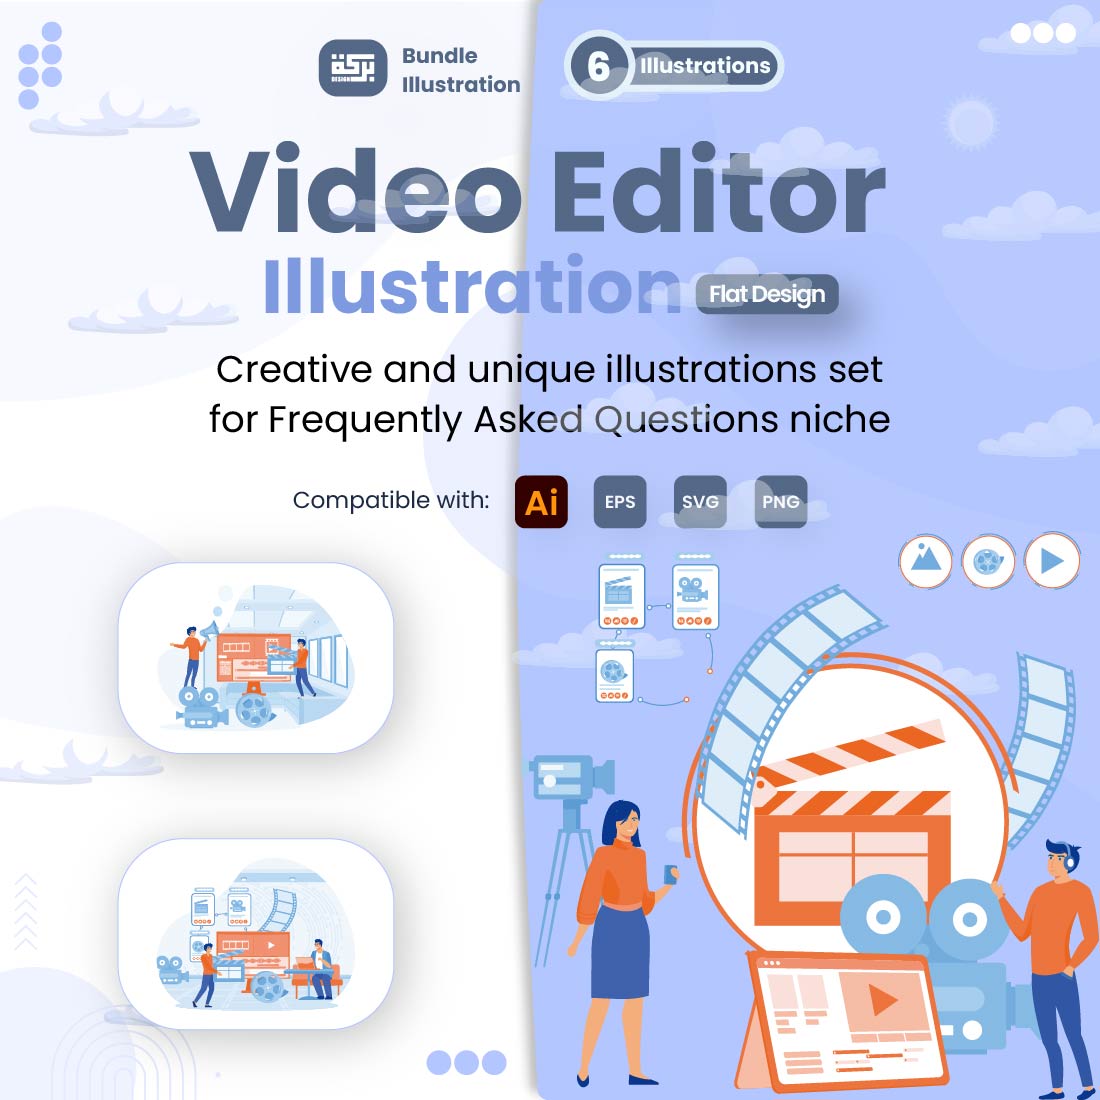 Illustration of Video Editor Concept cover image.